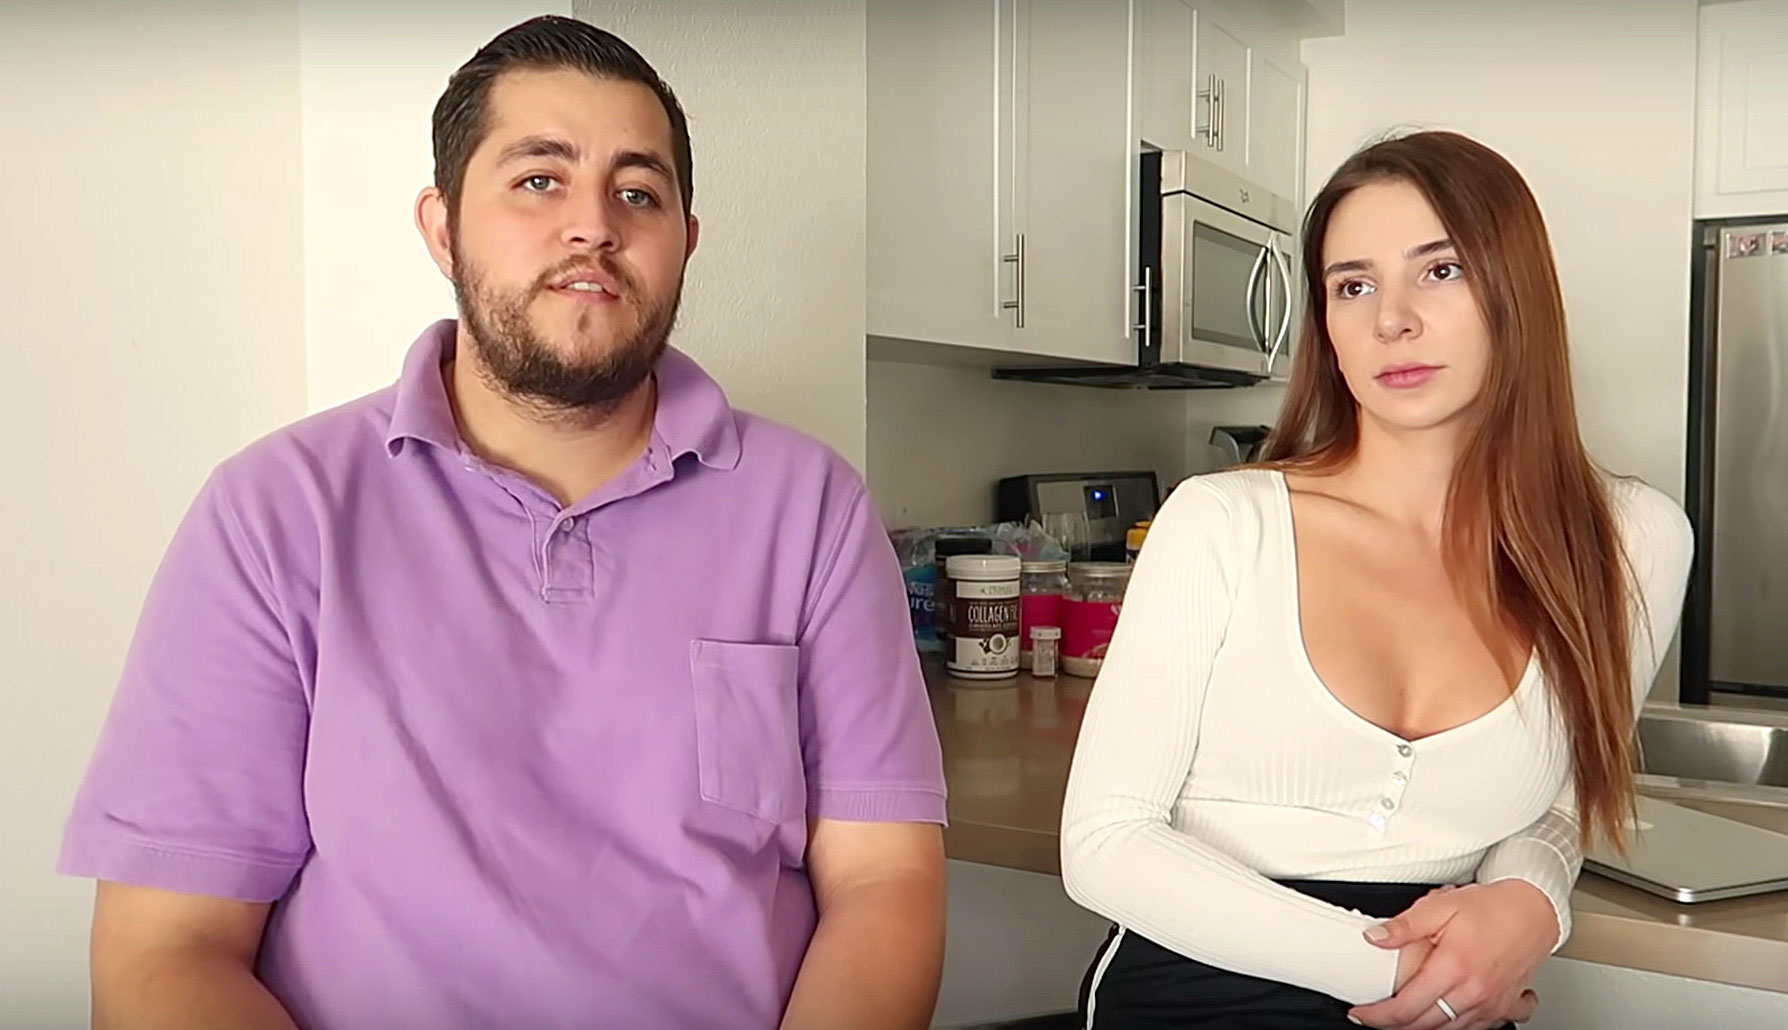 90 Day Fiance’s Jorge Nava Says Weight Loss Led to Split From Wife.